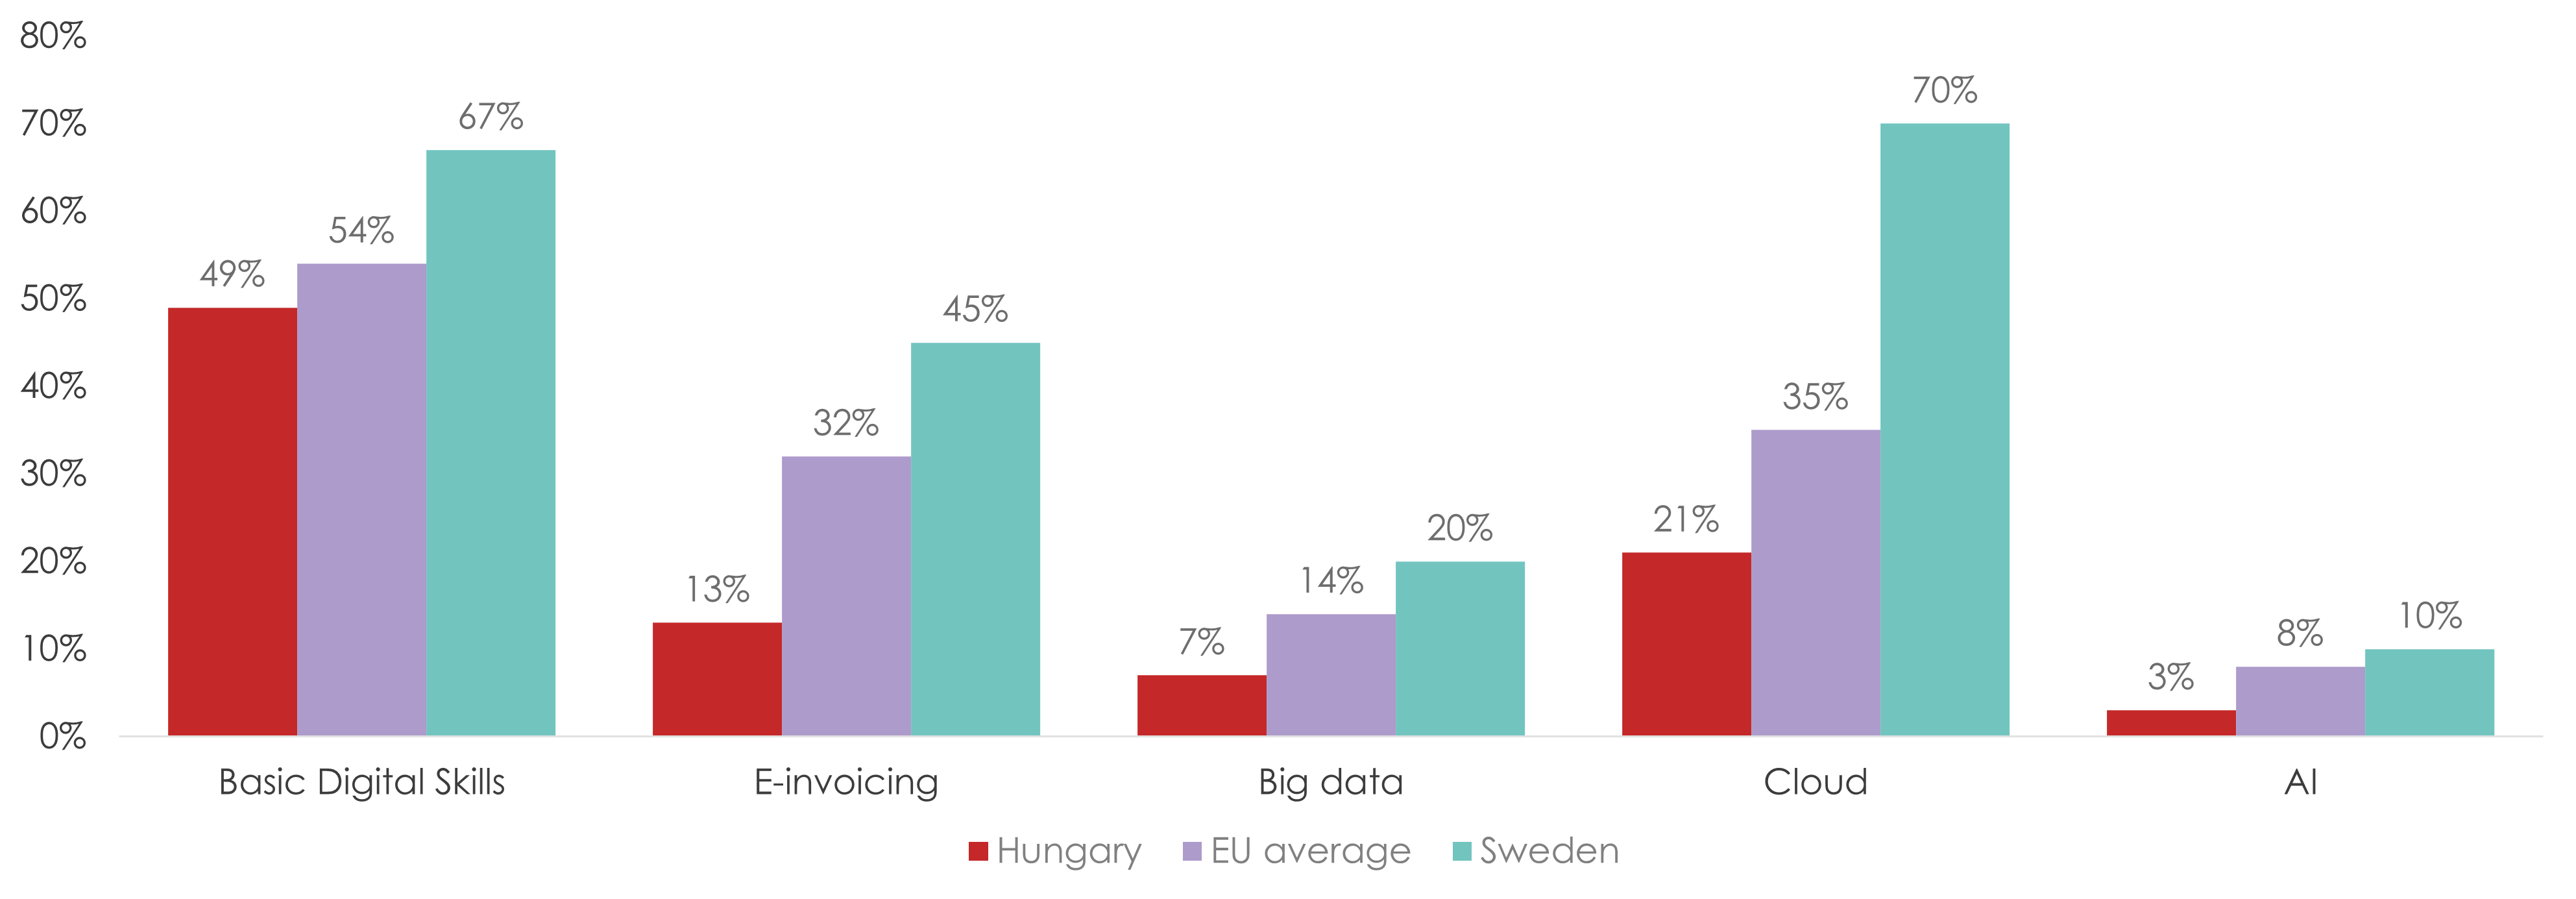 The state of the digital economy in Hungary compared to the EU average and Sweden